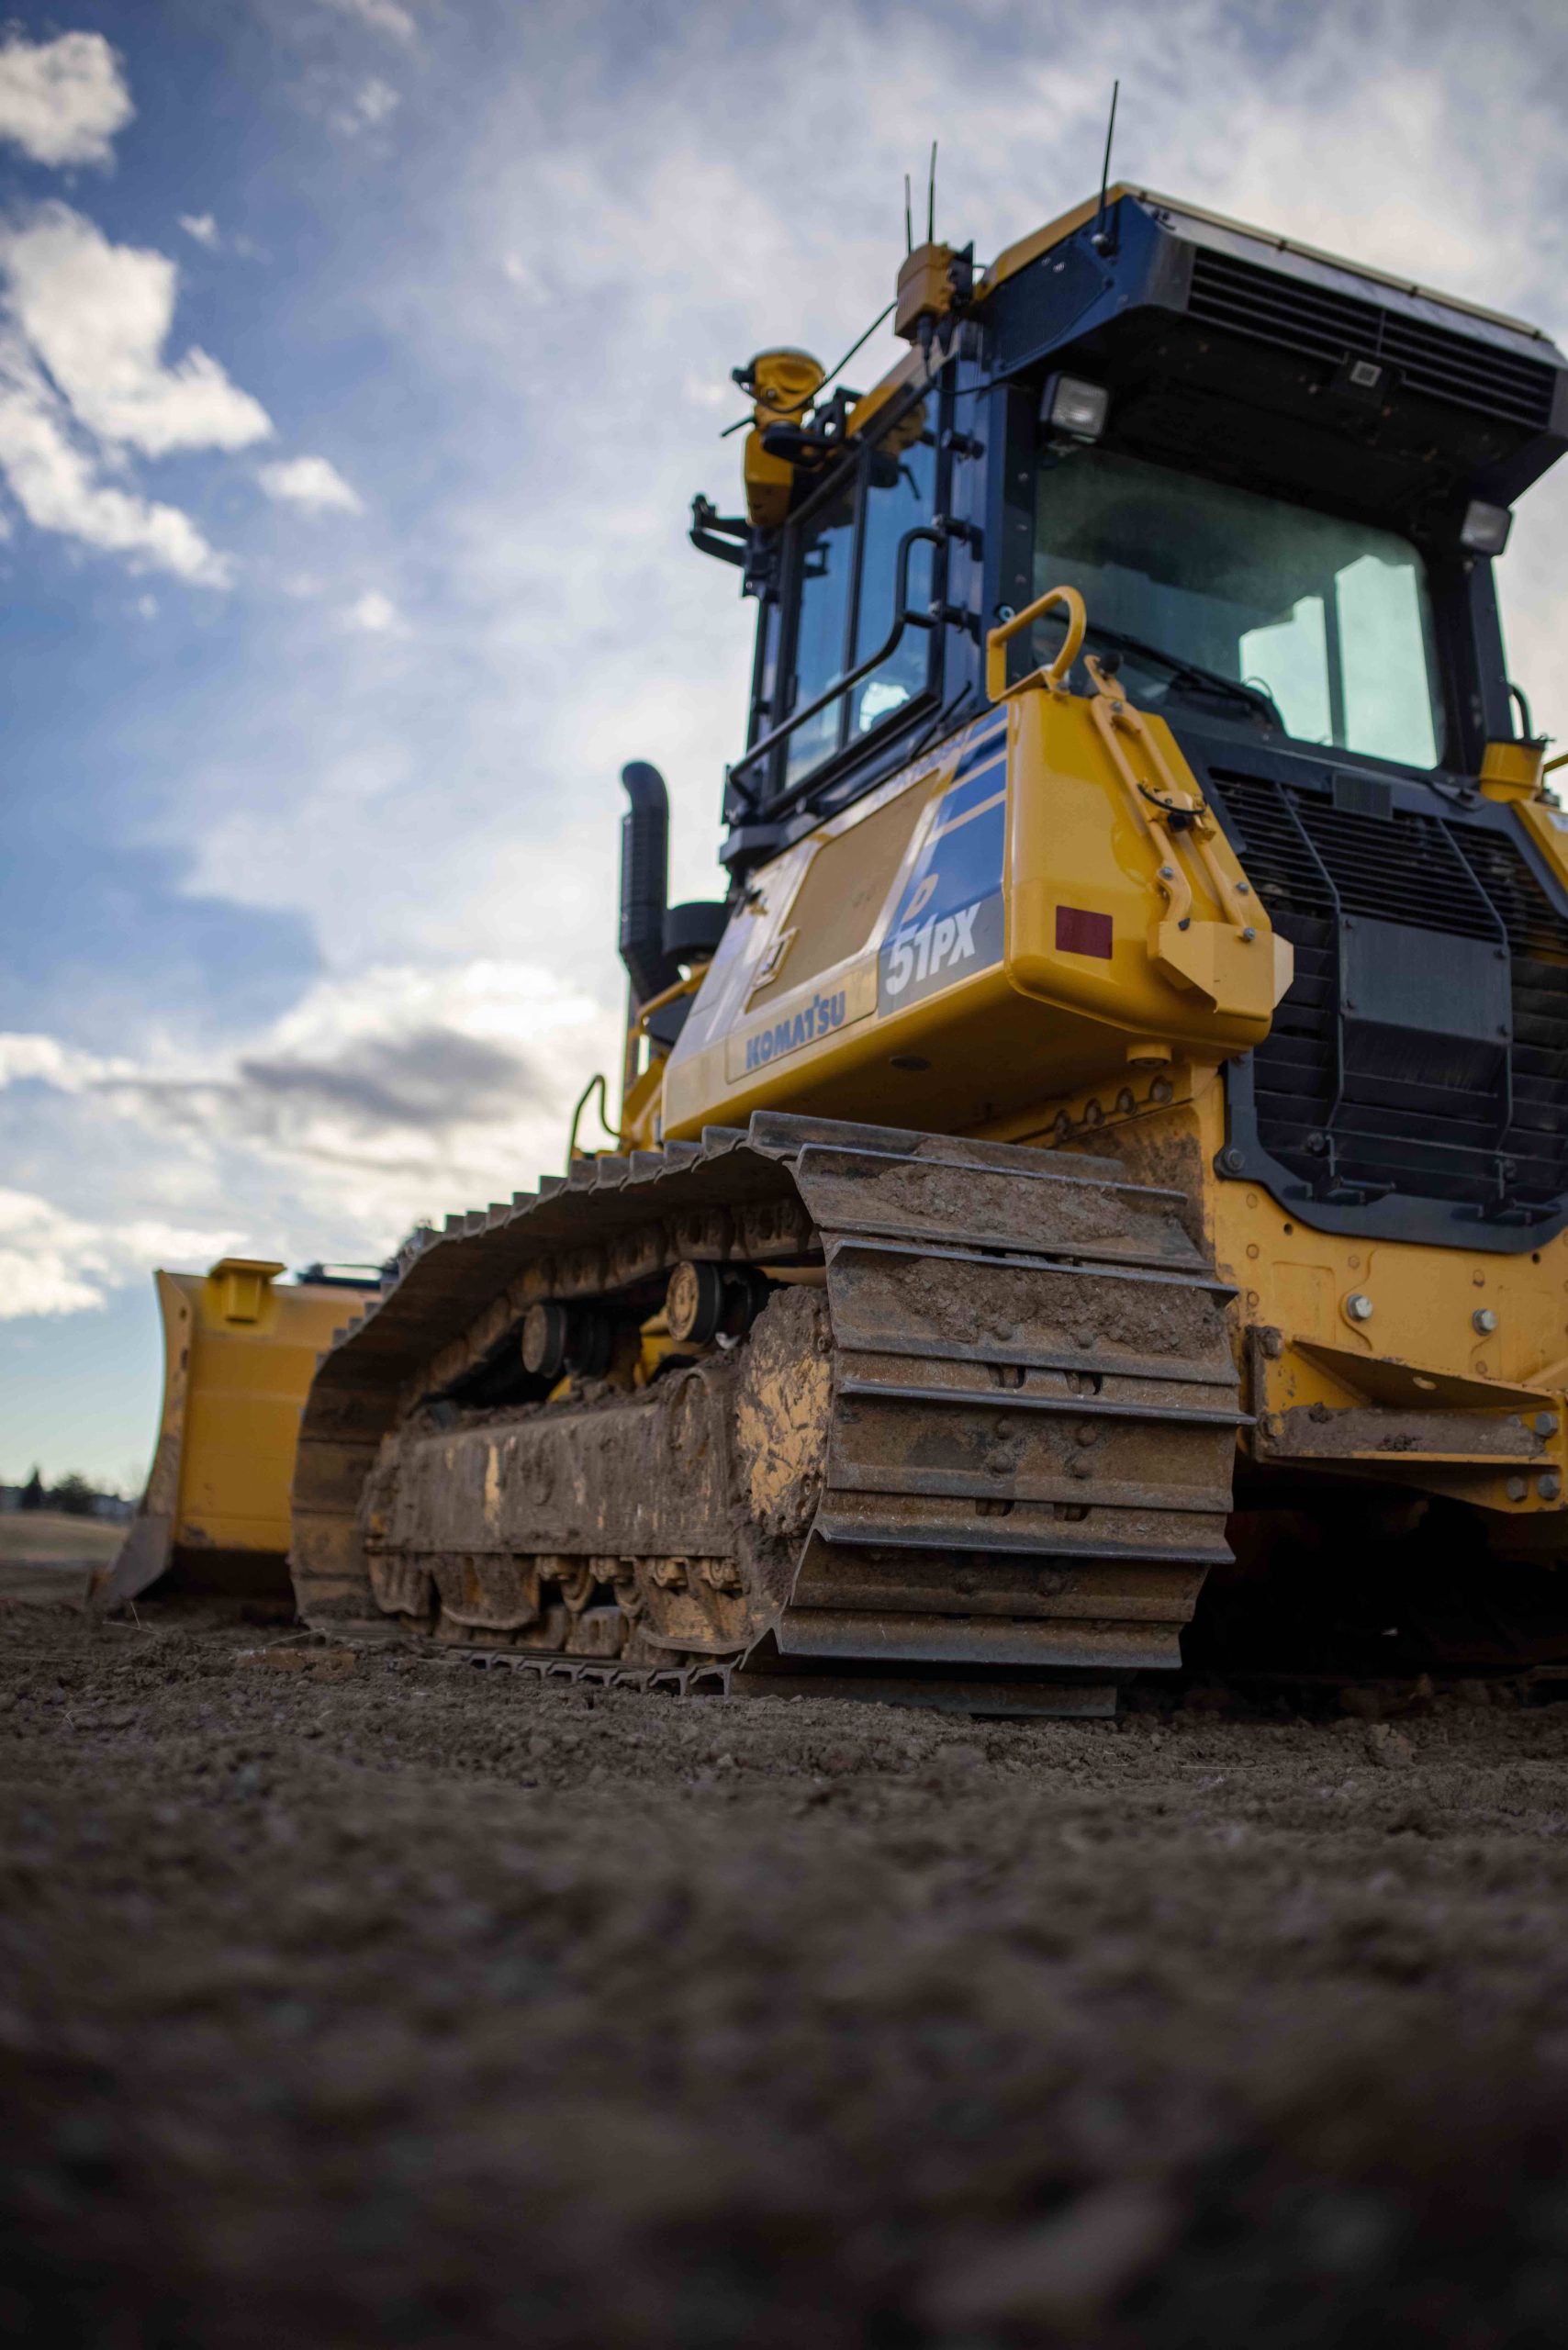 A dozer equipped with the Trimble 3D Grade Control System